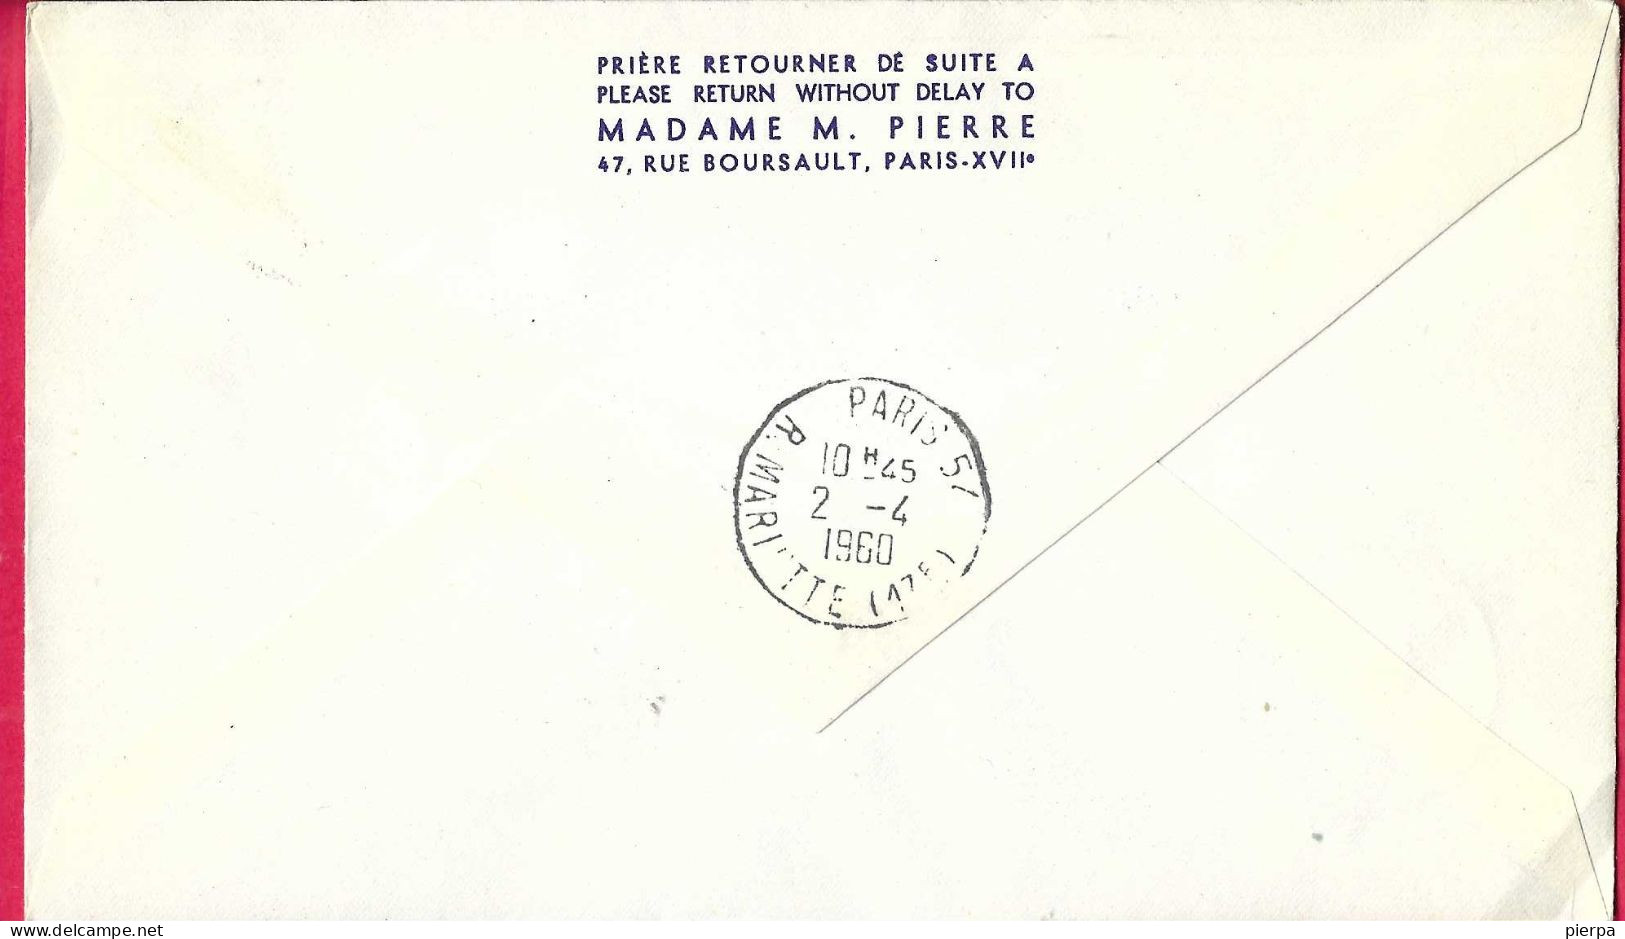 SVERIGE - FIRST CARAVELLE FLIGHT AIR FRANCE FROM STOCKHOLM TO PARIS *1.4.1960* ON OFFICIAL COVER - Covers & Documents